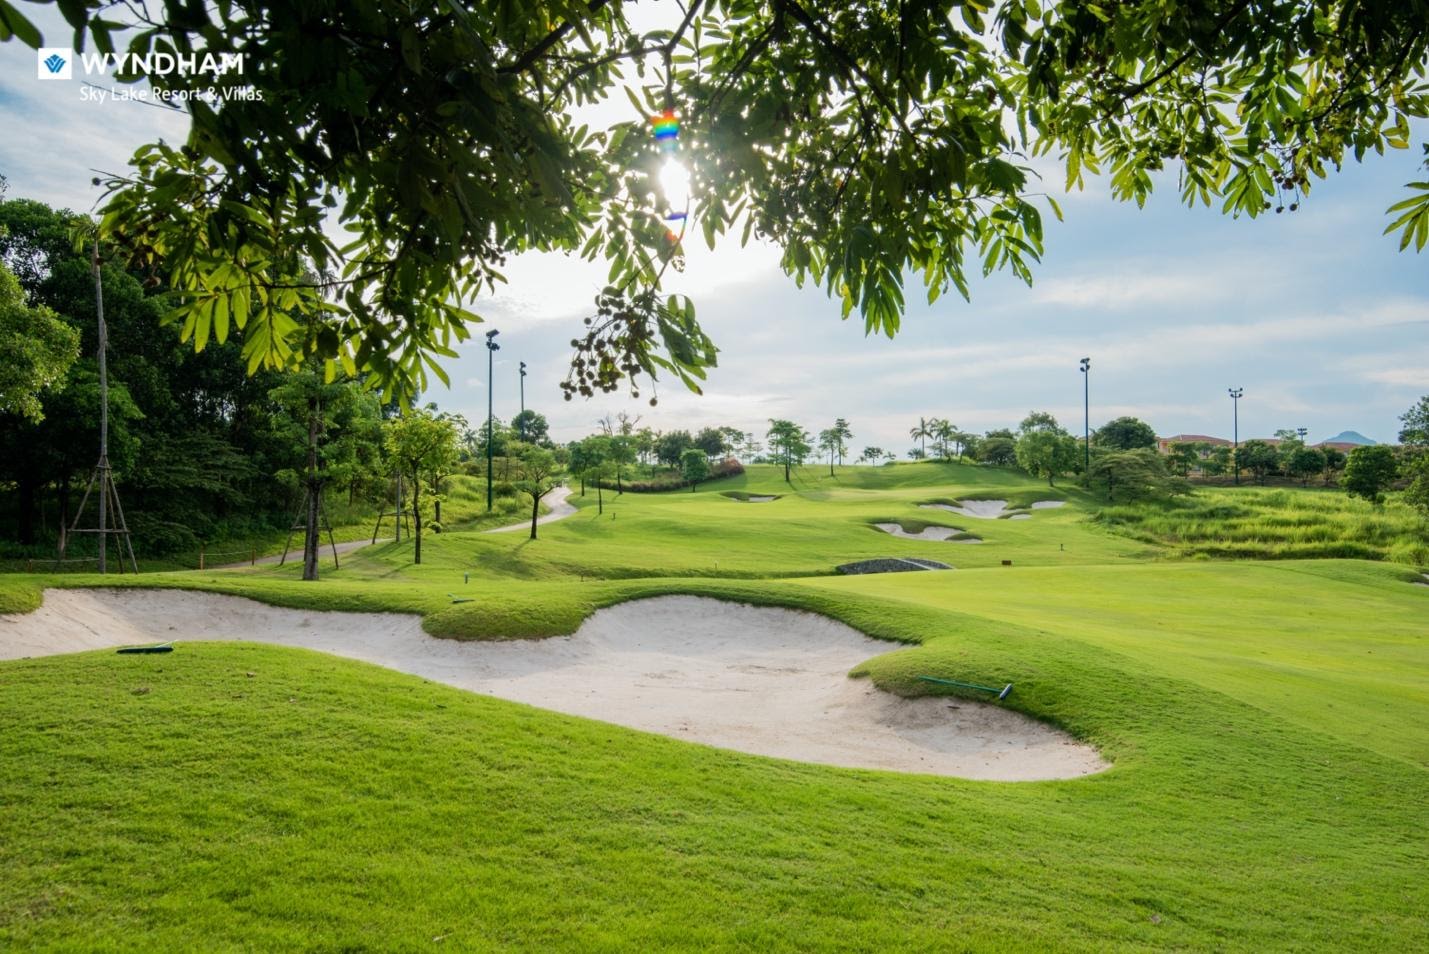 A picture containing grass, tree, outdoor, golfDescription automatically generated